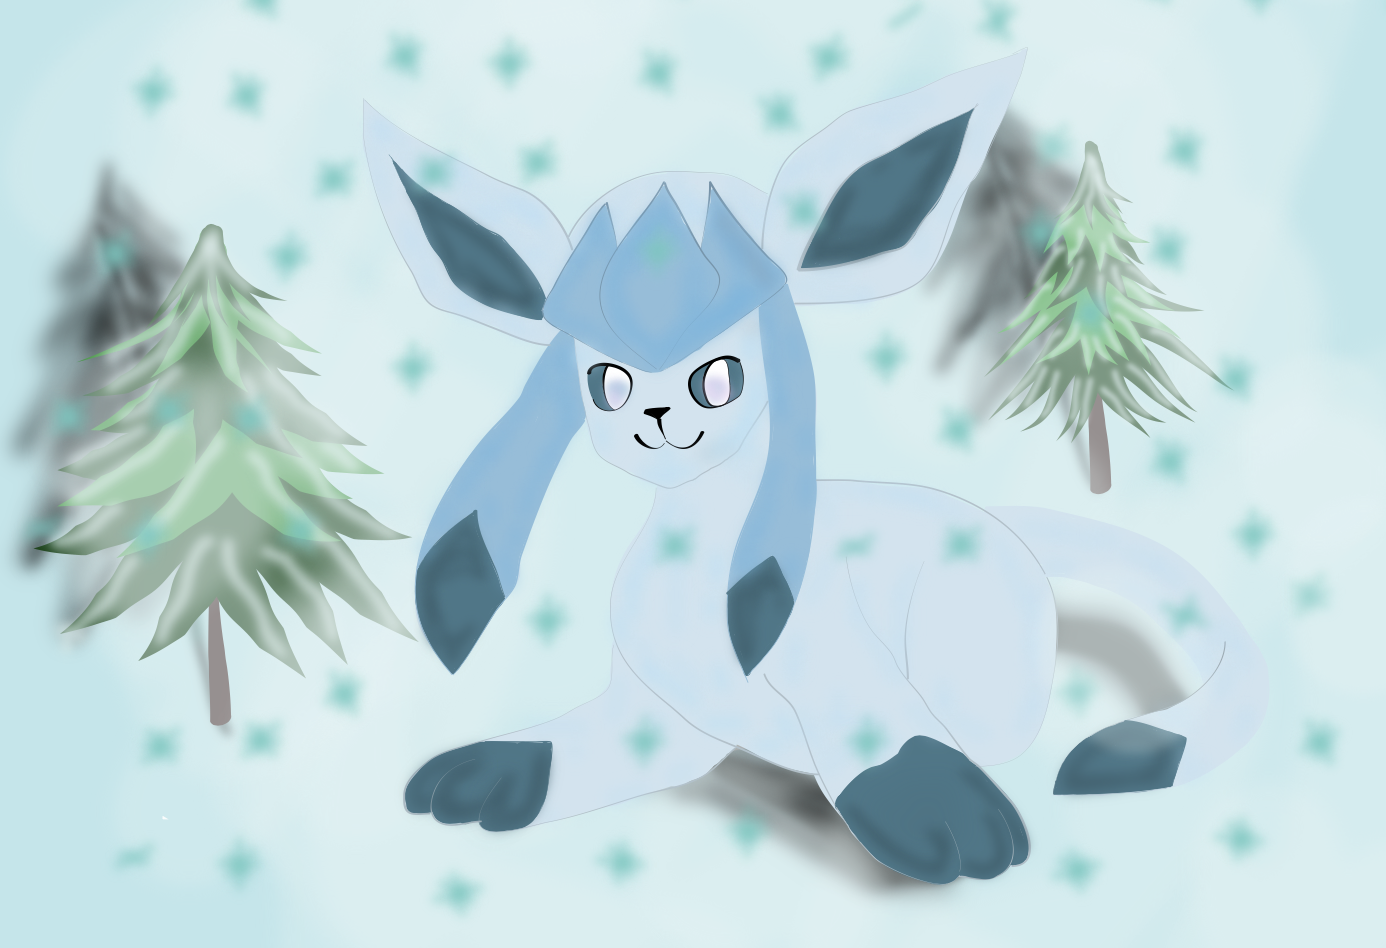 Glaceon DivineM4dness Attacking SoftSandBee.png